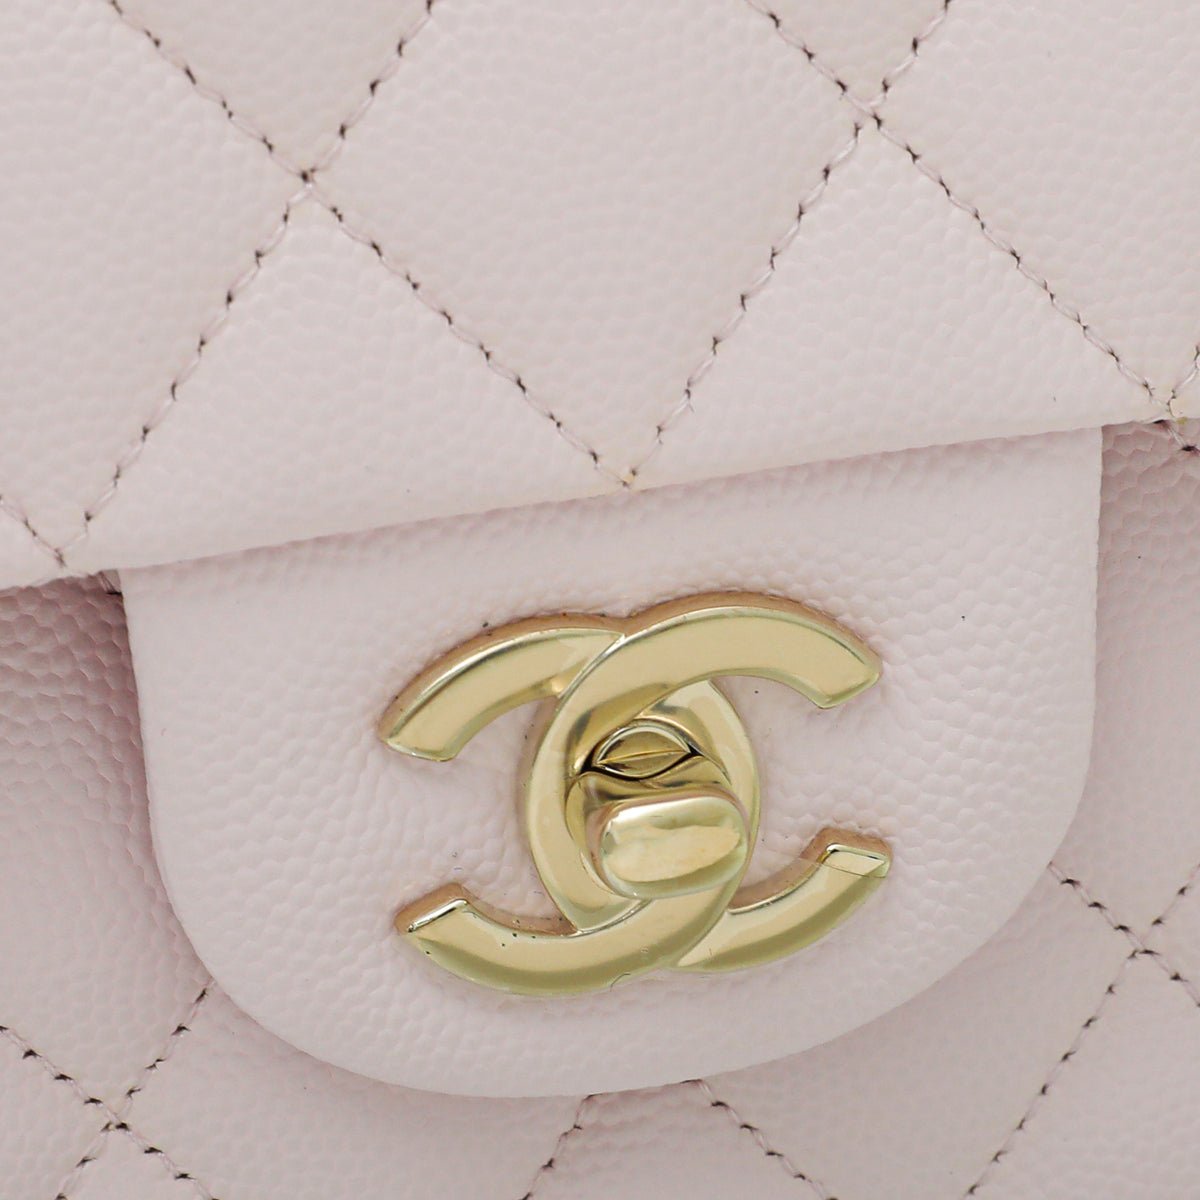 Madison Avenue Couture Chanel Baby Pink Quilted Caviar Jumbo Classic Bag   Lyst